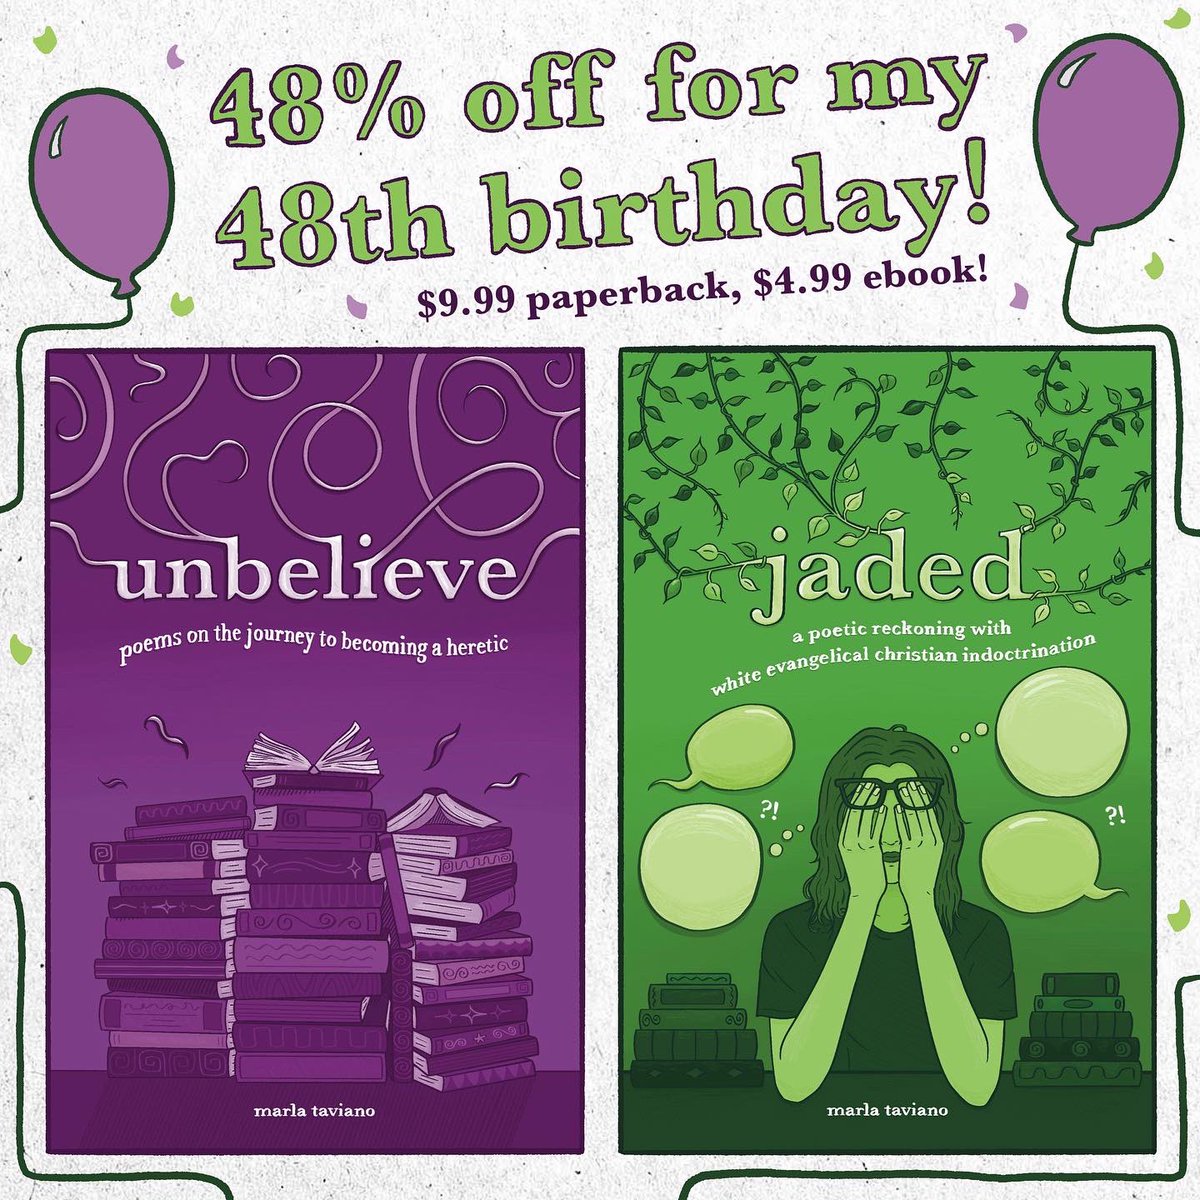 Tomorrow is my birthday, and my books are on BIG SALE all week loooong!! 💜💚🎃🎉 Spread the word!